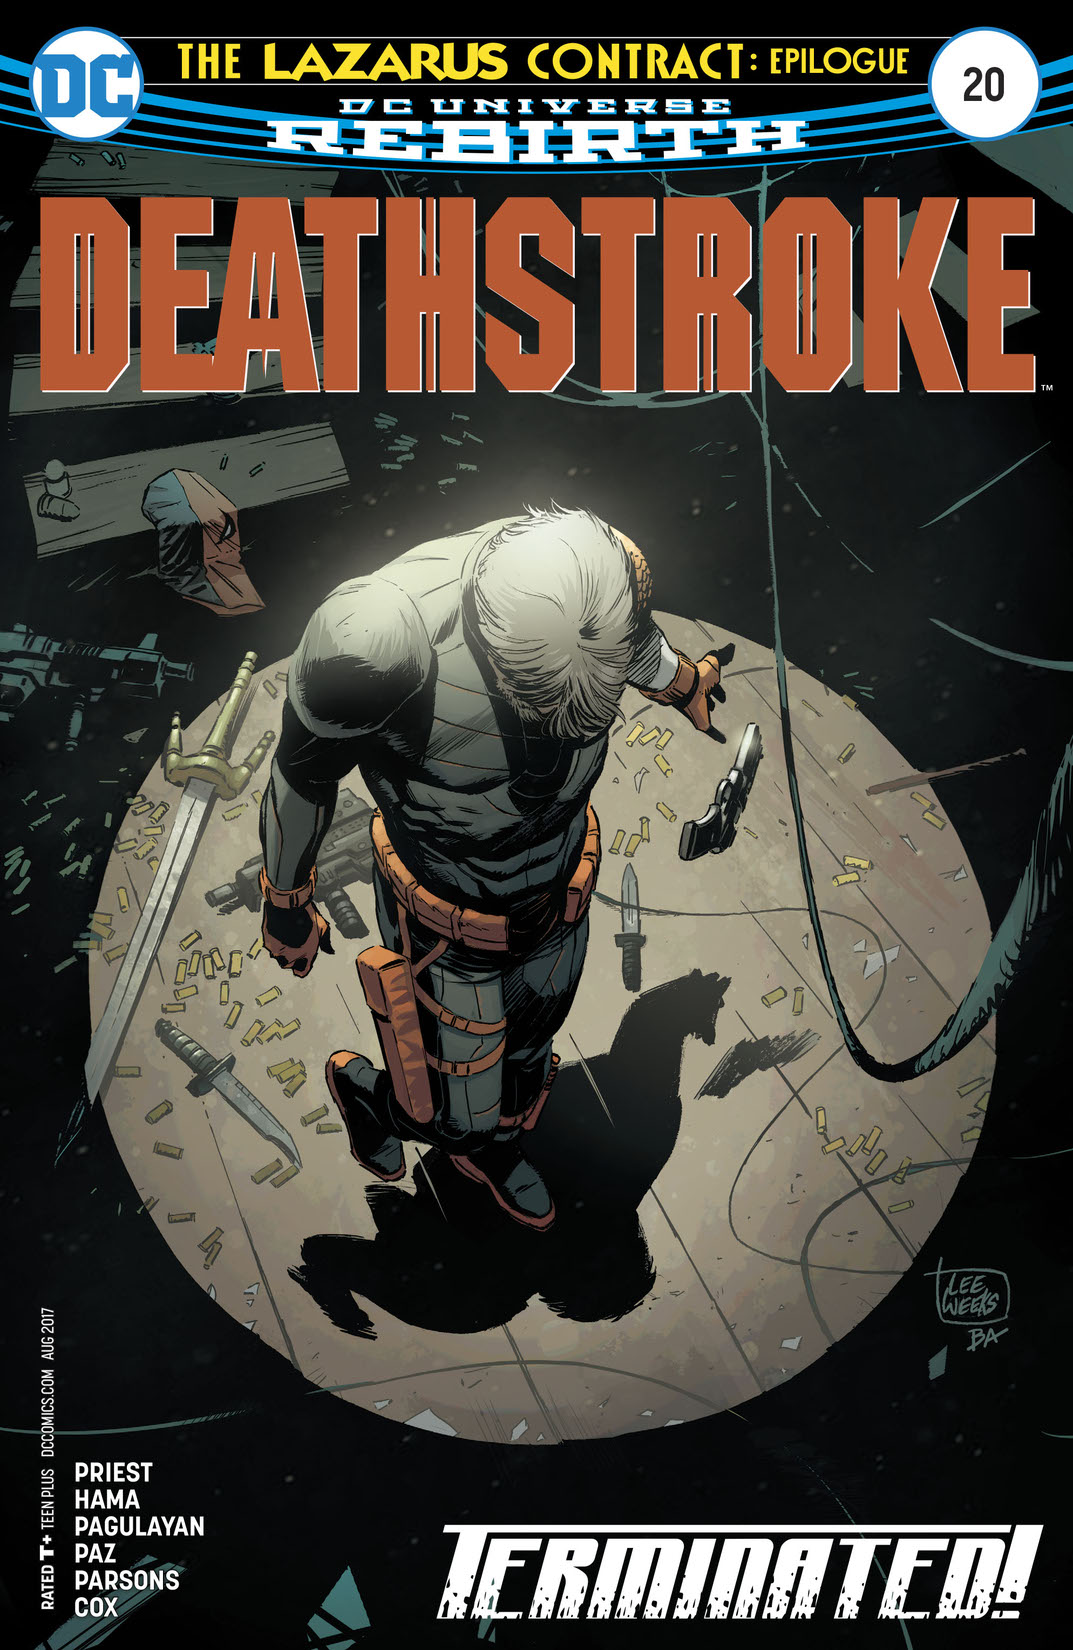 Deathstroke (2016-) #20 preview images